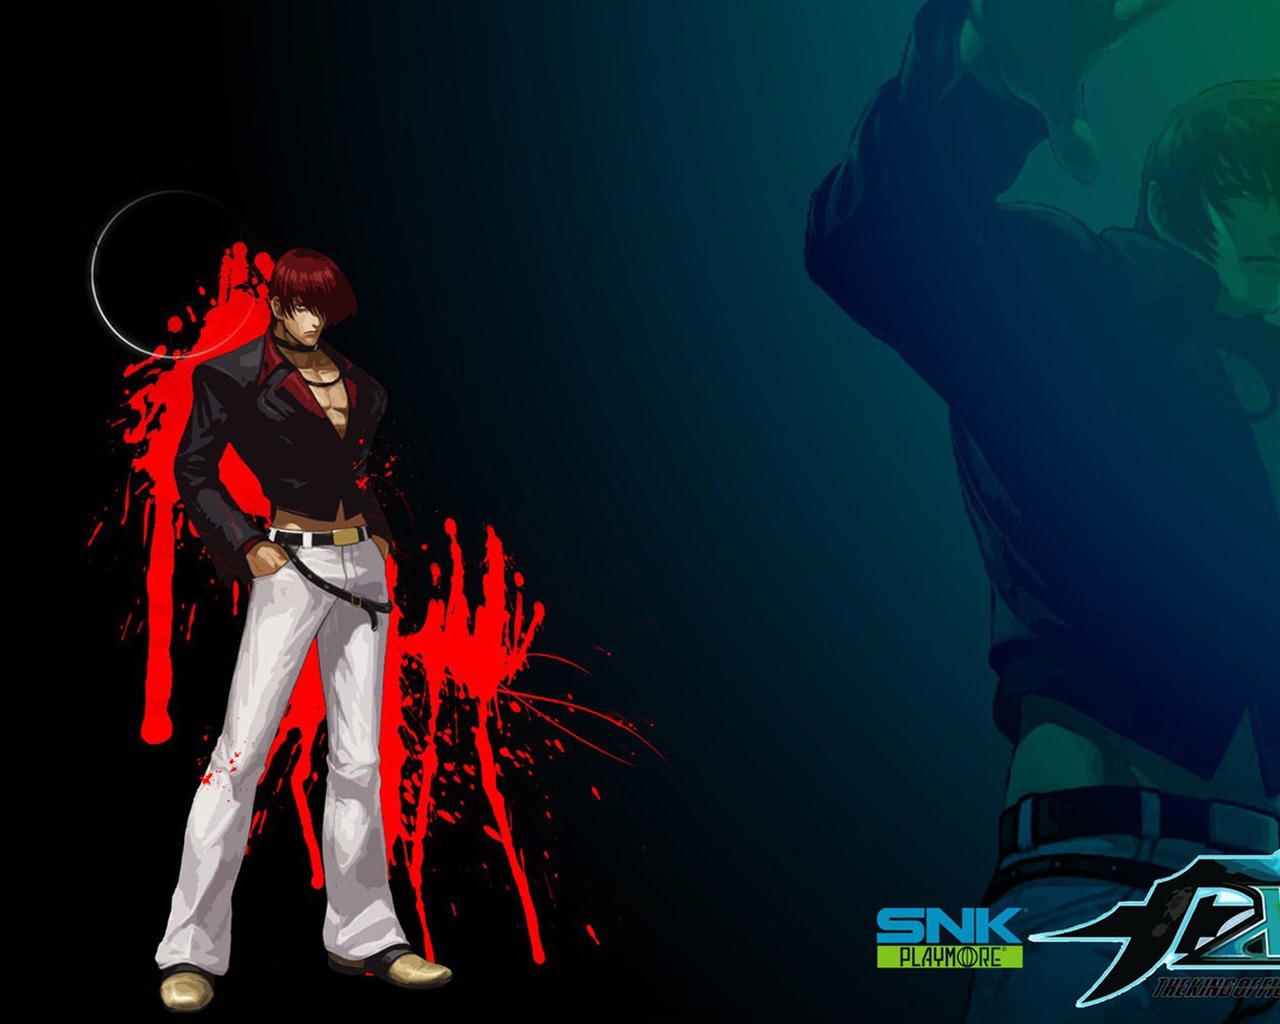 Le roi de wallpapers Fighters XIII #12 - 1280x1024